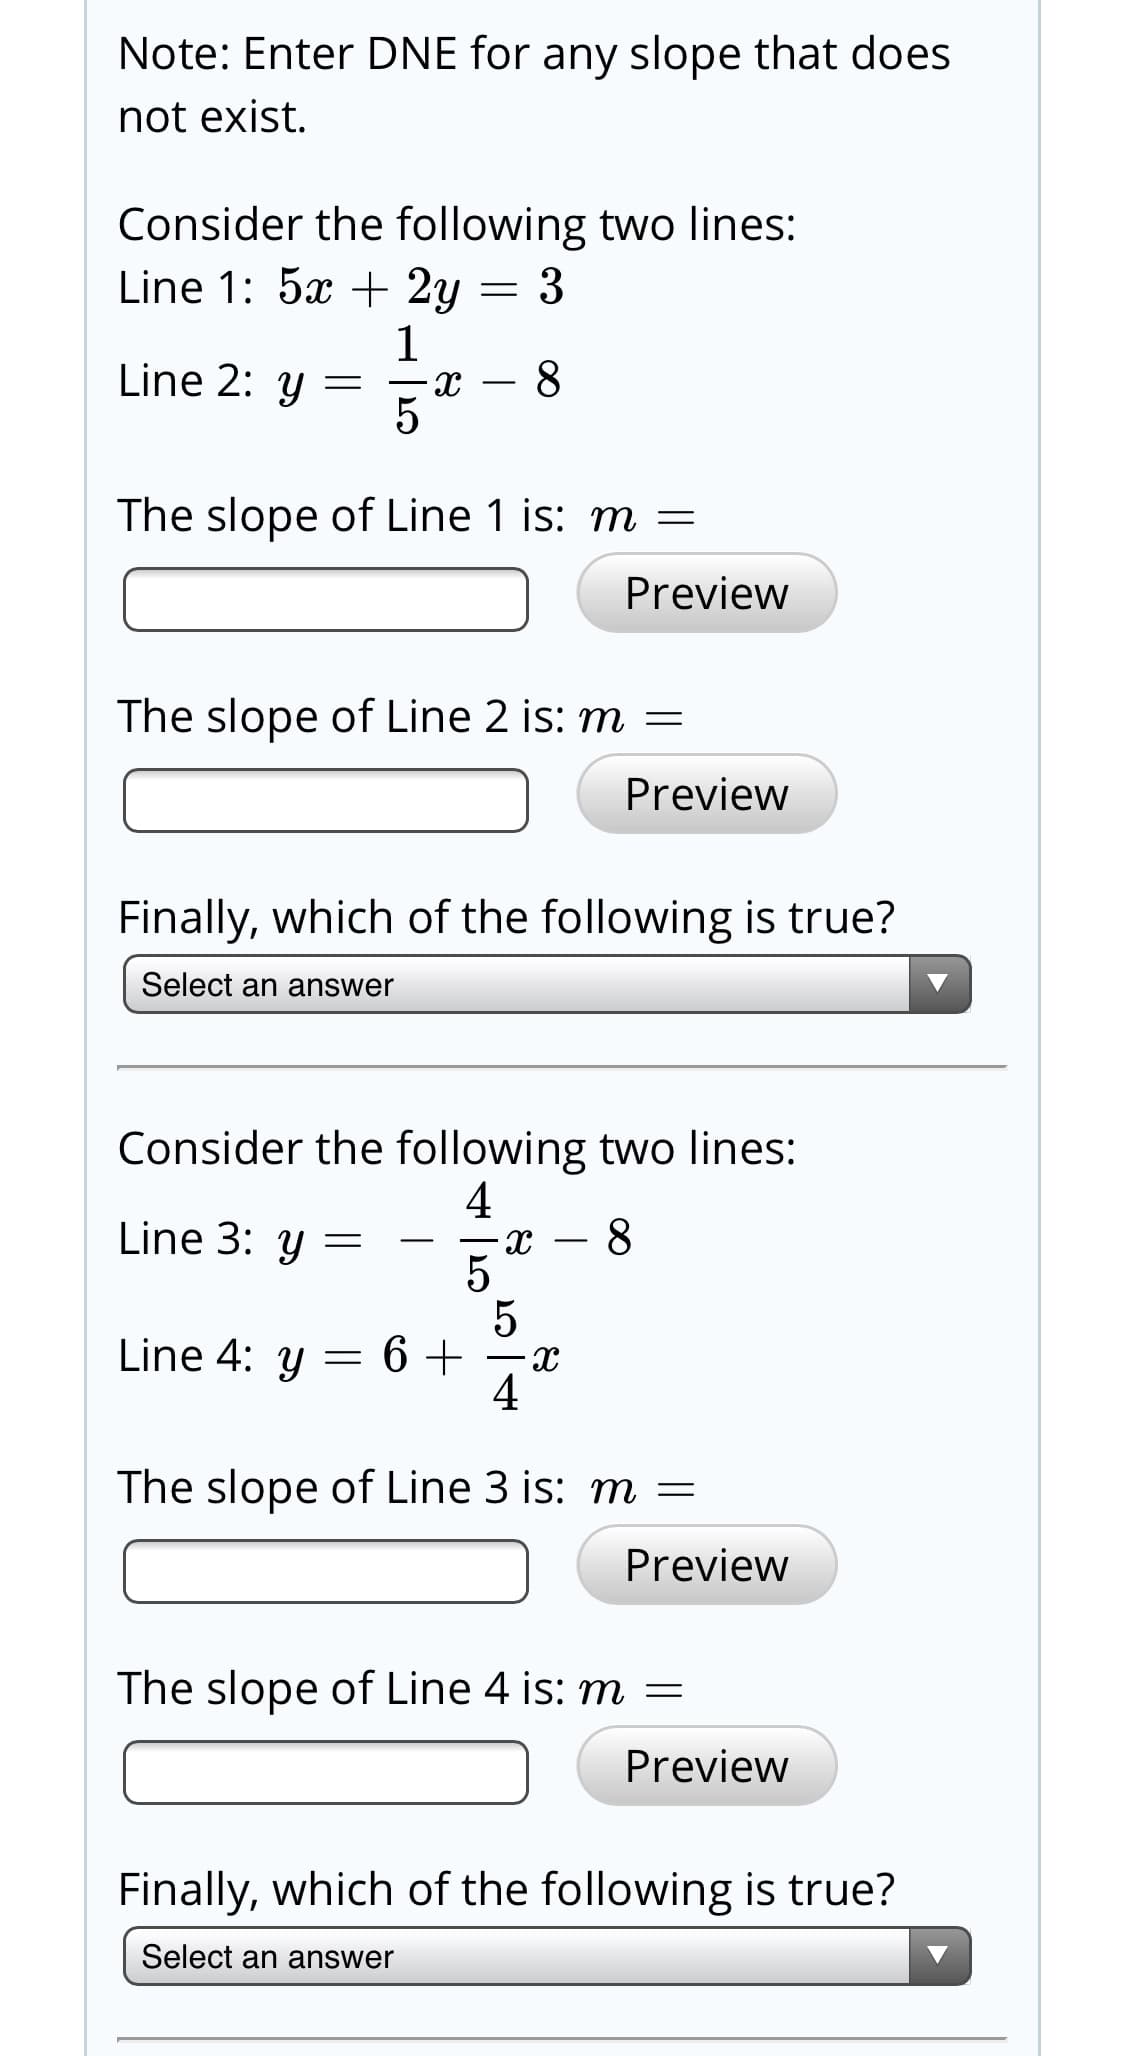 Note: Enter DNE for any slope that does
not exist.
Consider the following two lines:
Line 1: 5x + 2y = 3
- 8
Line 2: y
The slope of Line 1 is: m =
Preview
The slope of Line 2 is: m =
Preview
Finally, which of the following is true?
Select an answer
Consider the following two lines:
4
Line 3: y =
8
Line 4: y = 6 +
a-
4
The slope of Line 3 is: m =
Preview
The slope of Line 4 is: m =
Preview
Finally, which of the following is true?
Select an answer
